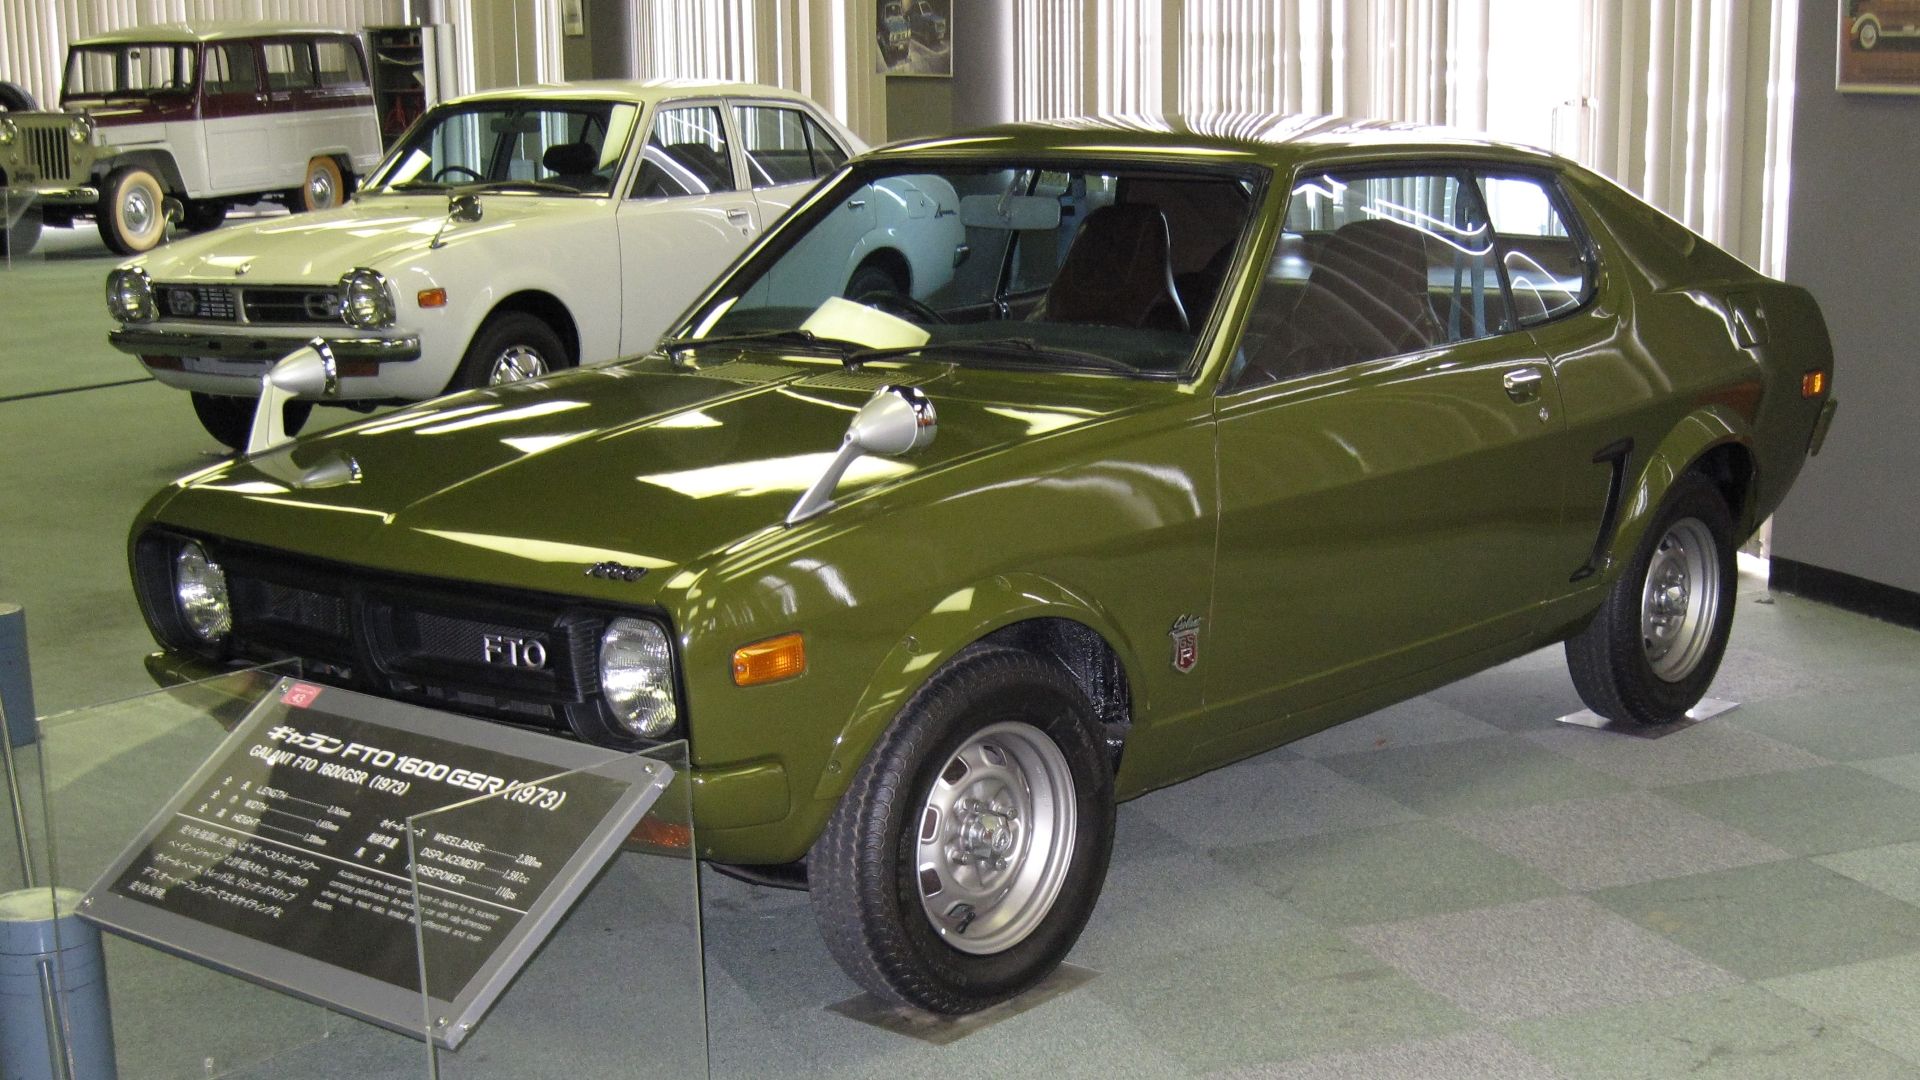 Front 3/4 of a 1973 Mitsubishi Galant Coupe FTO 1600 GSR on display